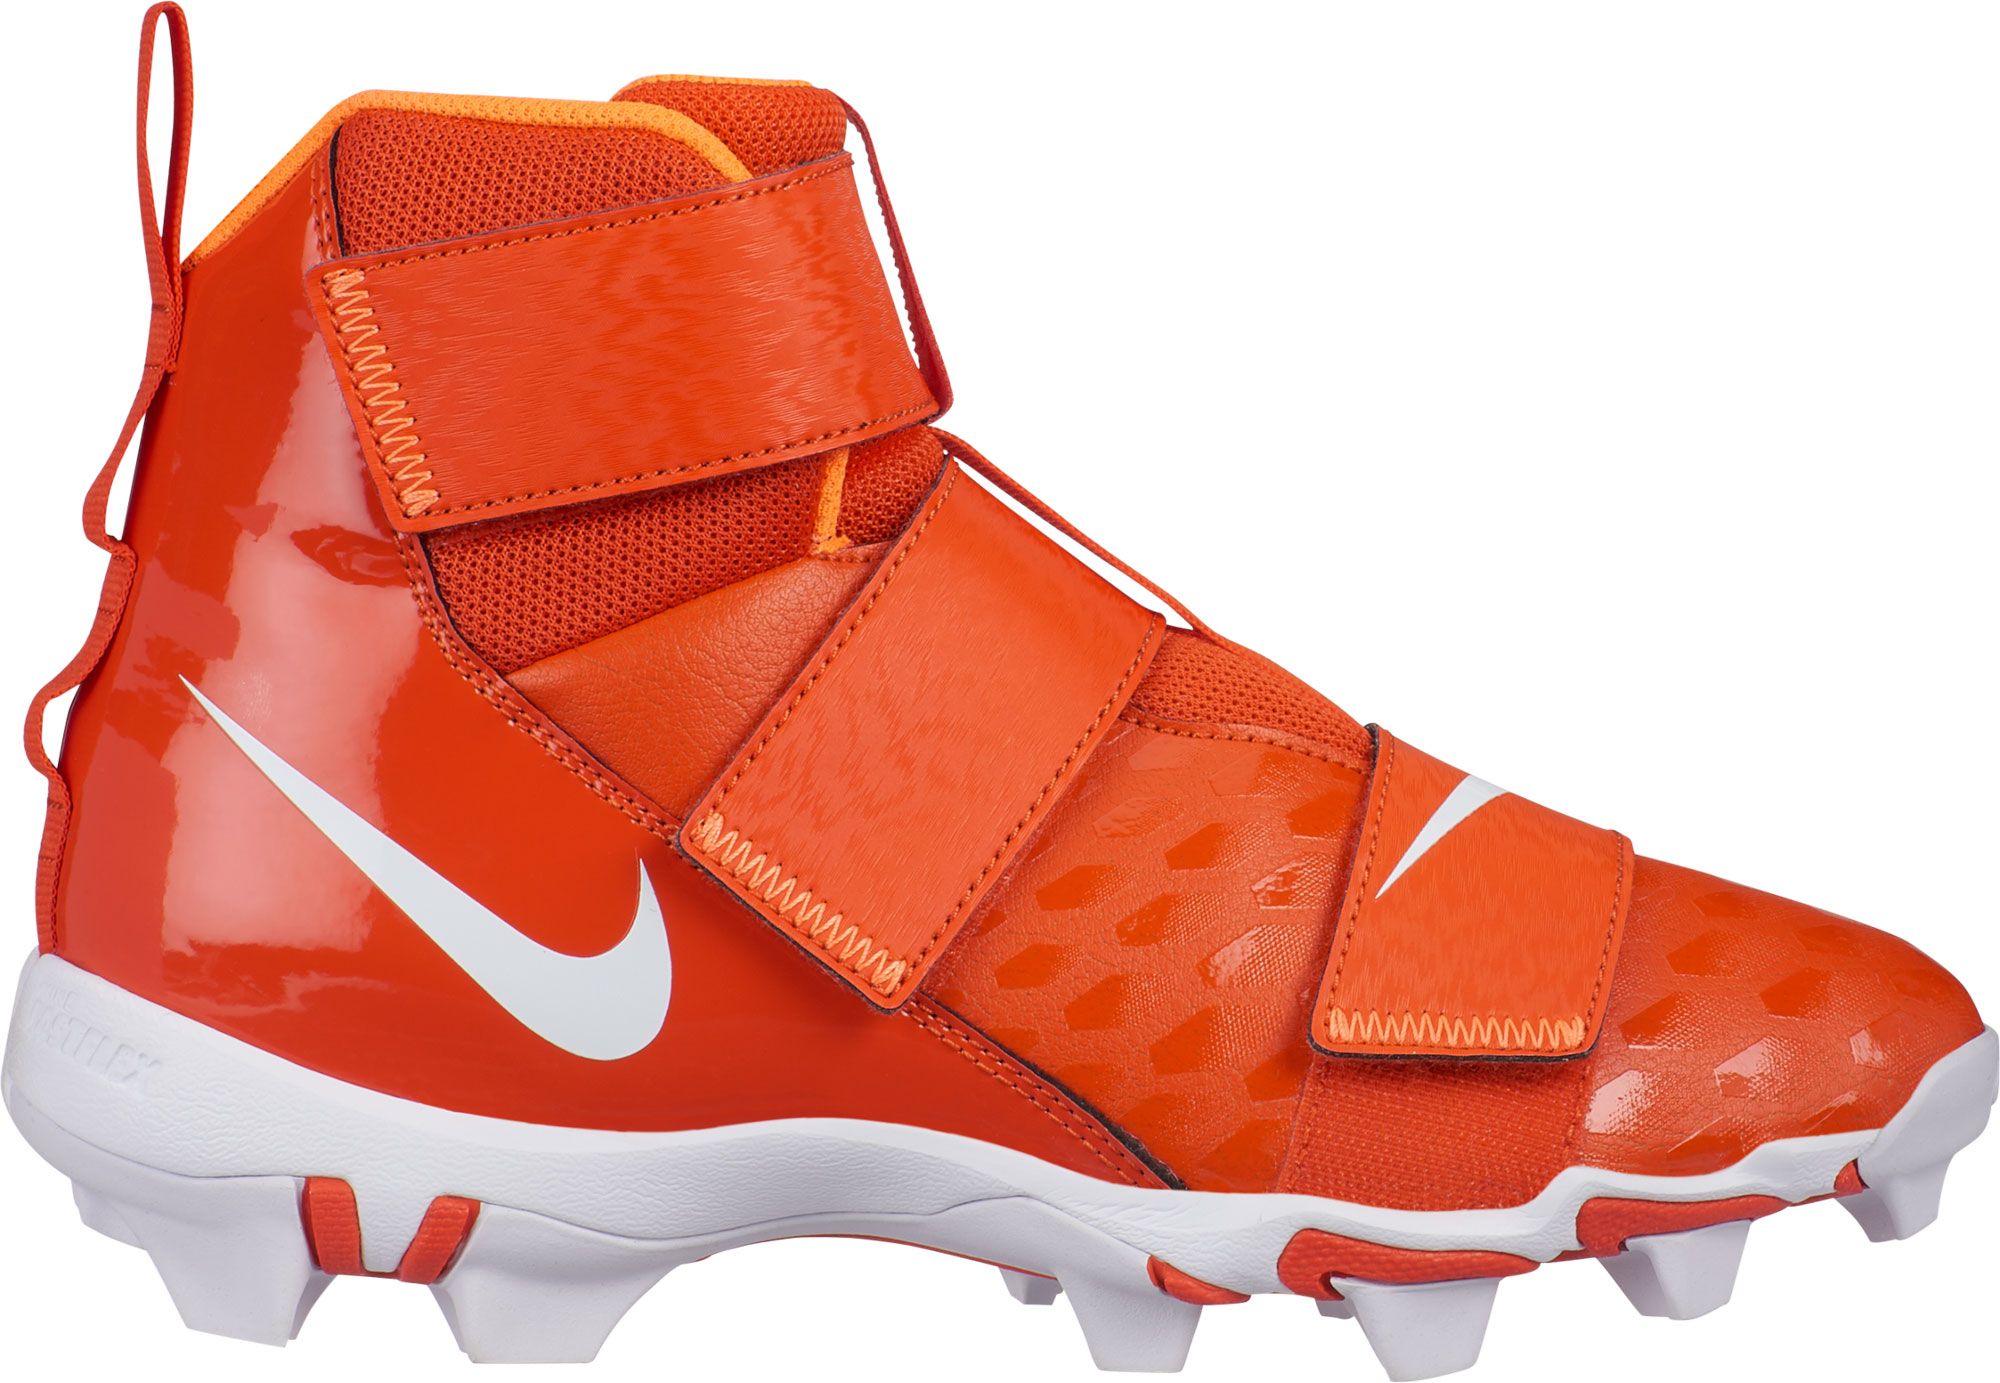 orange and blue youth football cleats 